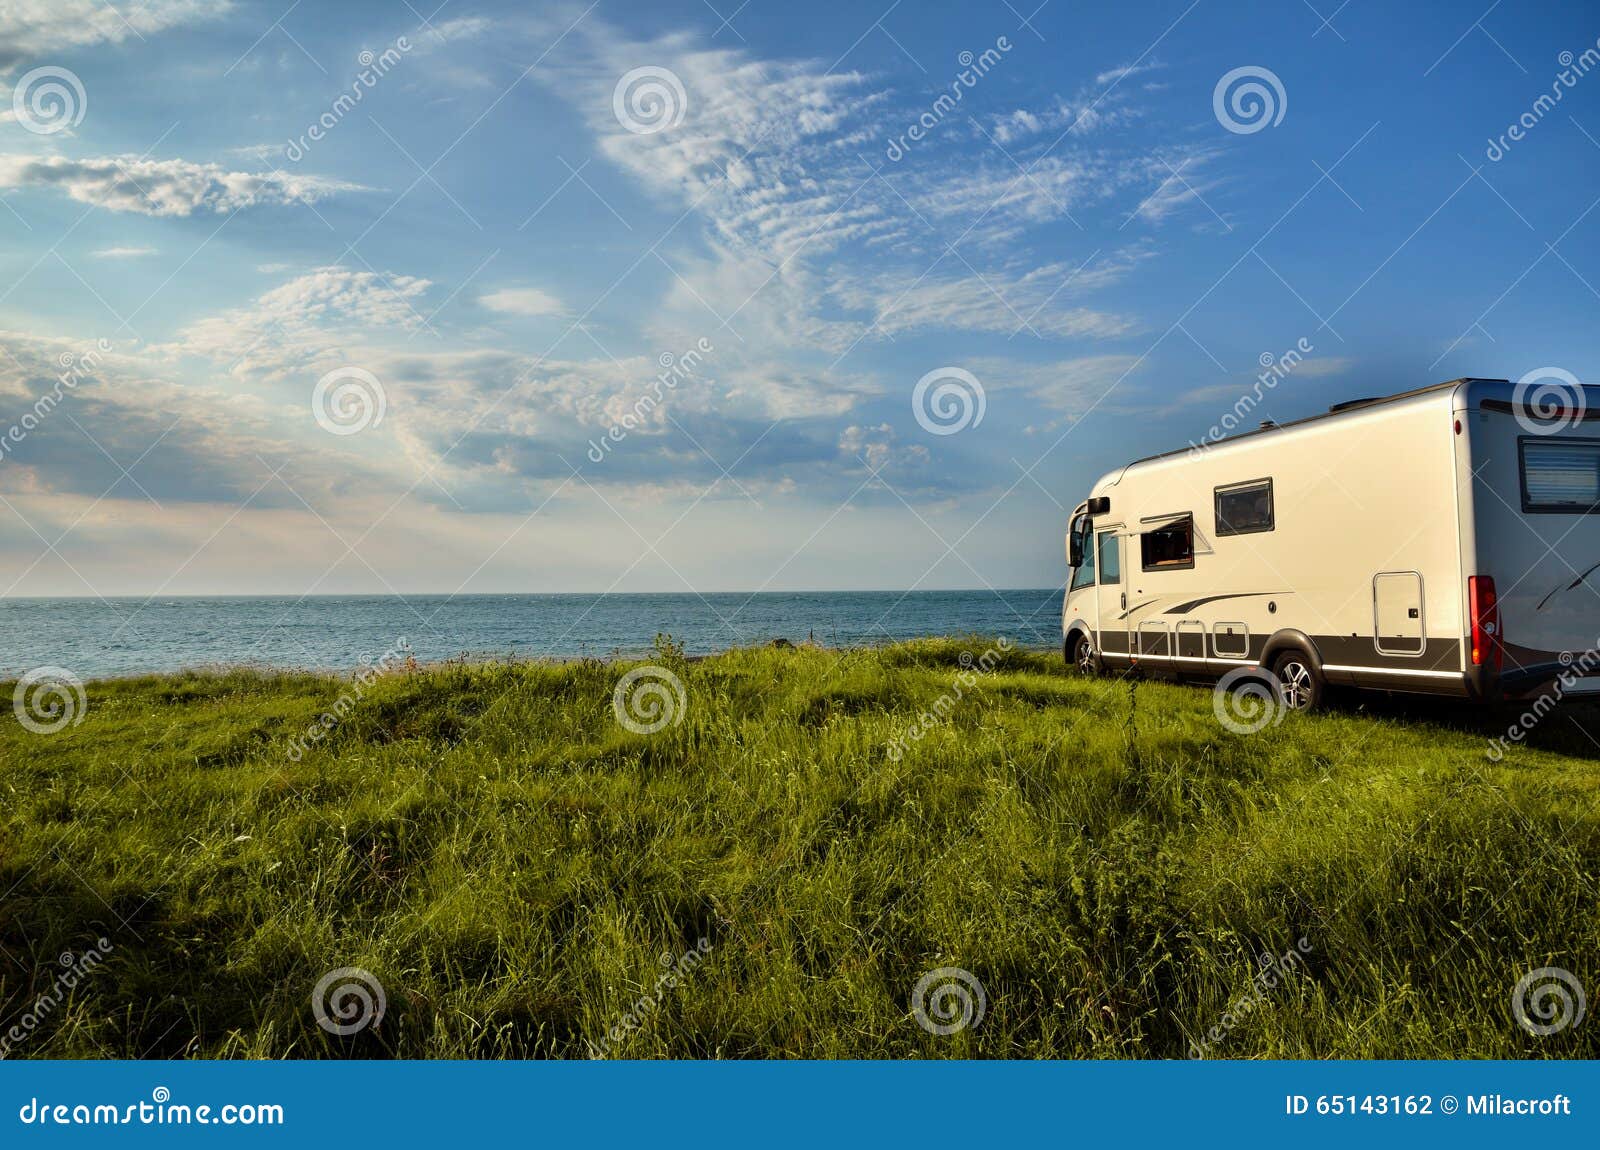 recreational vehicle in a meadow